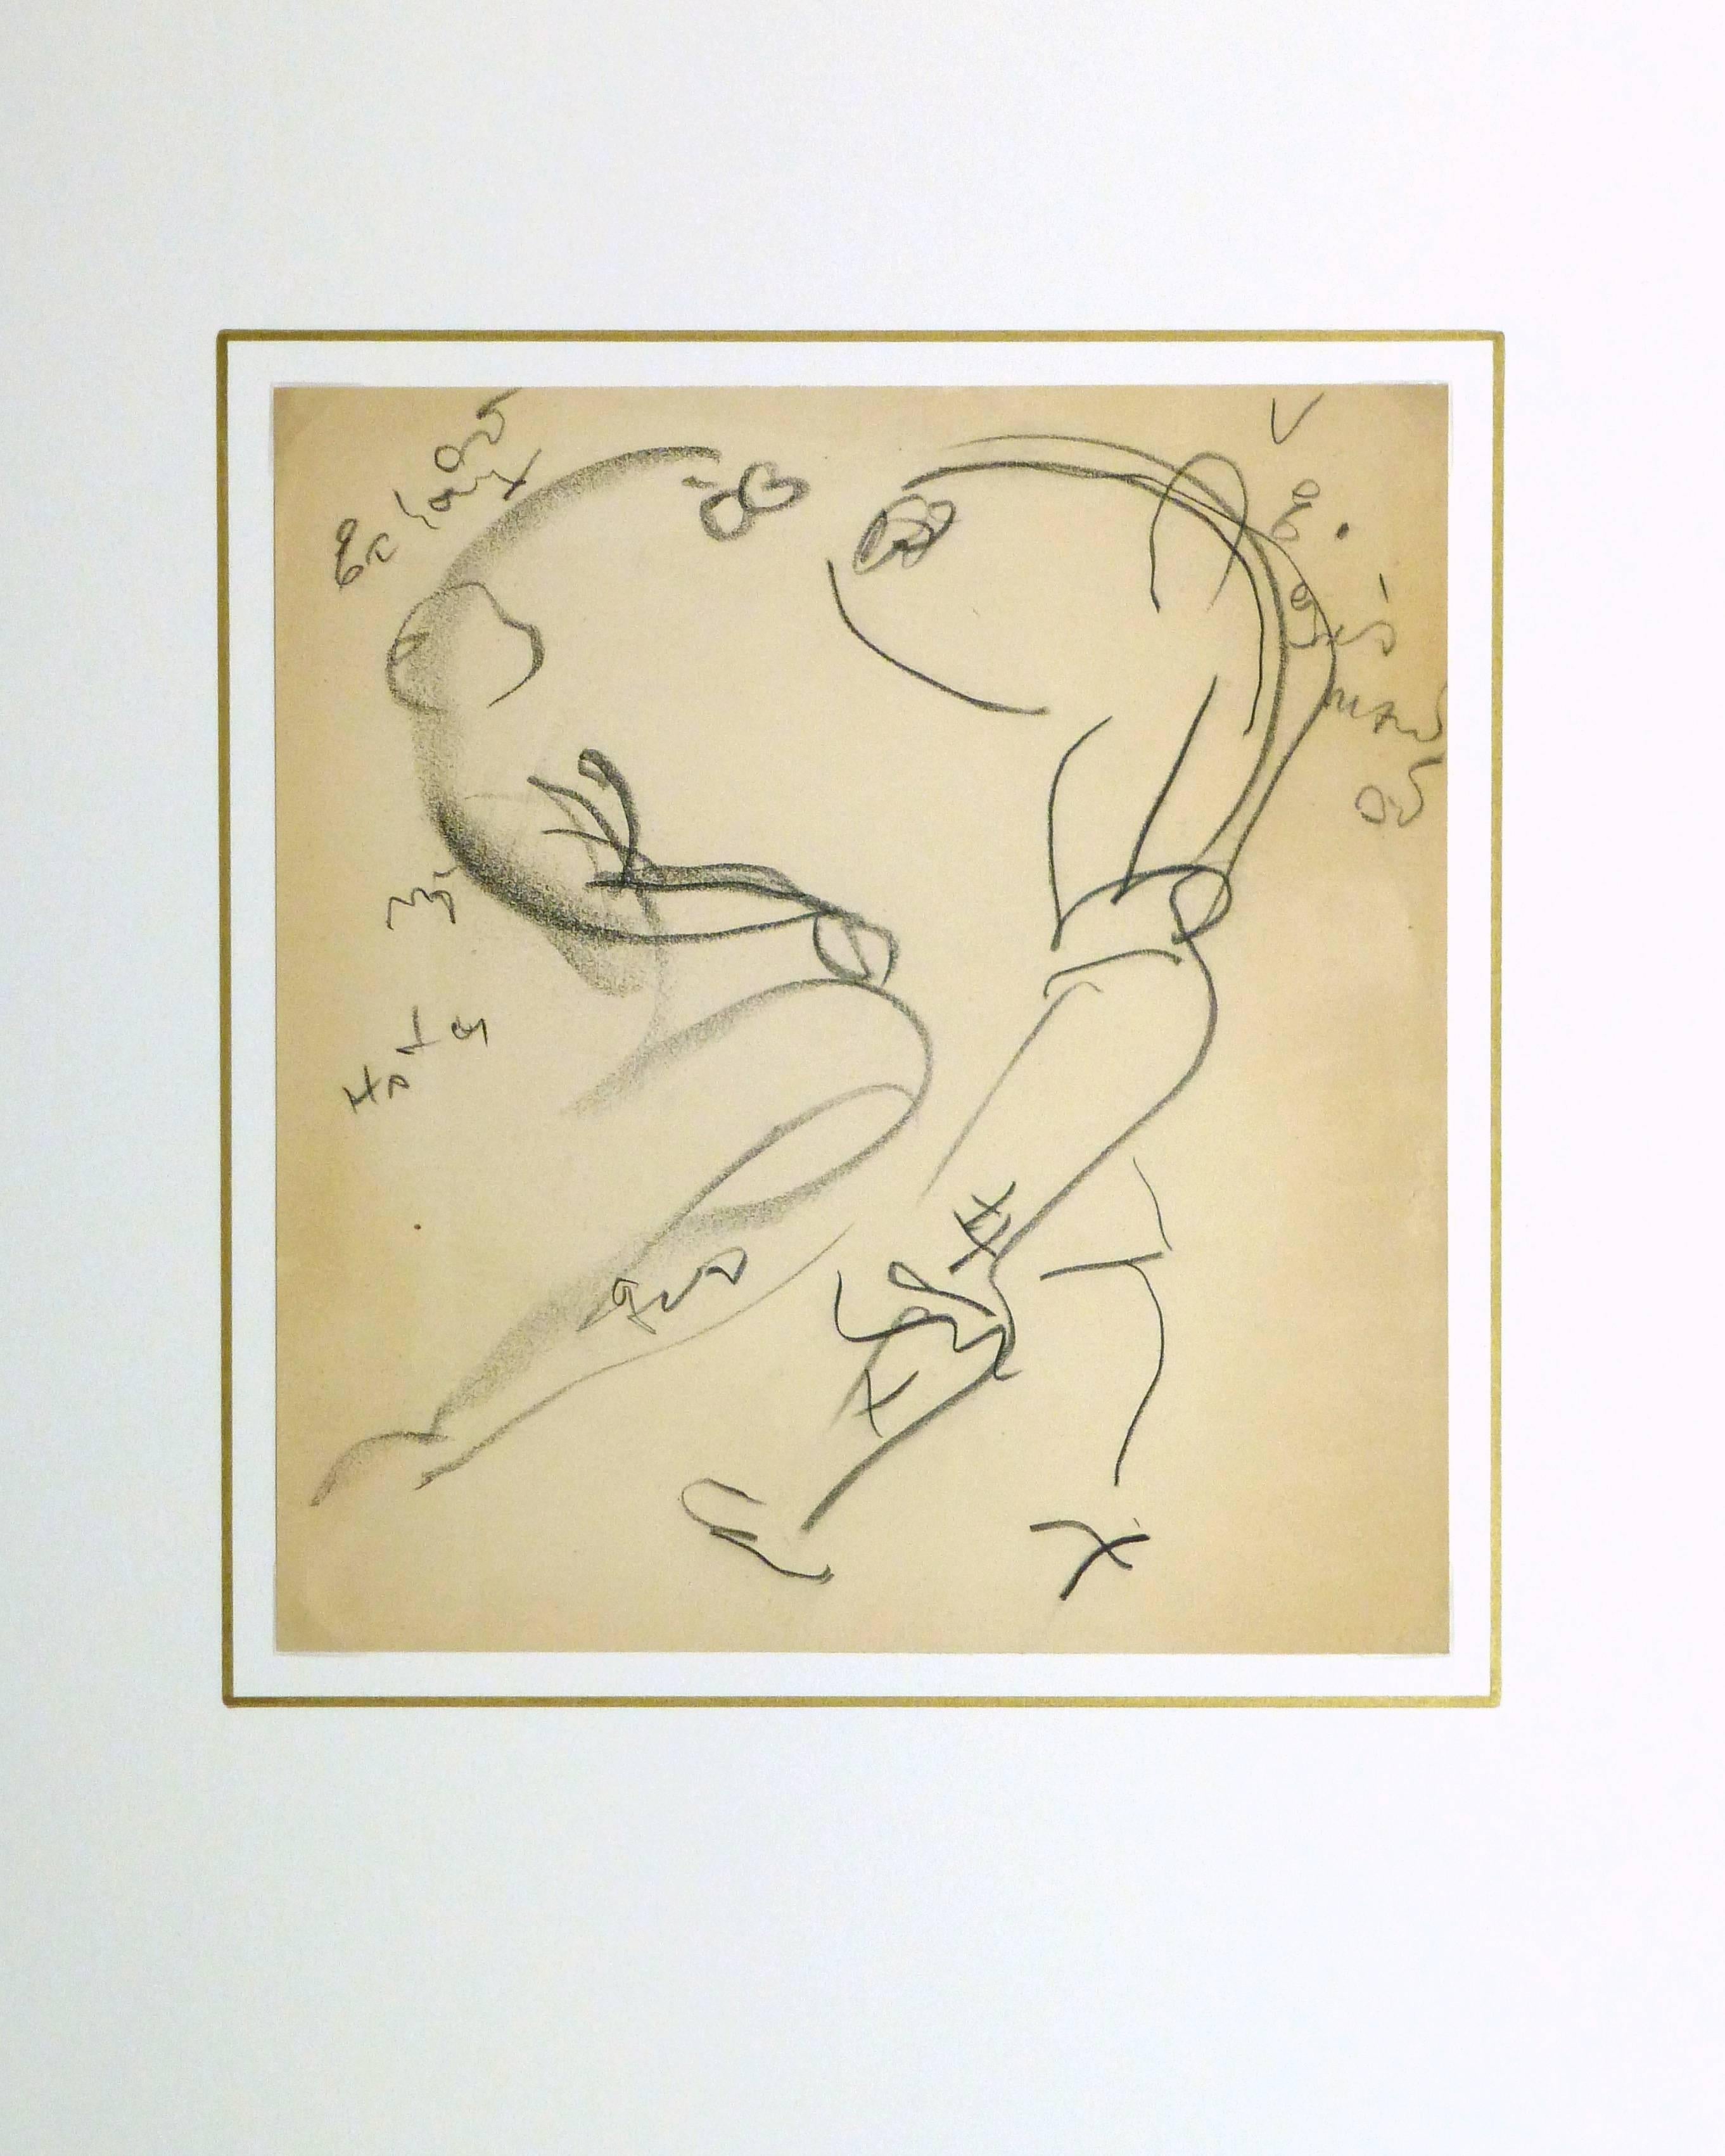 Dynamic charcoal abstract drawing using fluid lines to depict two dancers by French artist Jean Toth (1899-1972), circa 1950.

Original artwork on paper displayed on a white mat with a gold border. Mat fits a standard-size frame. Archival plastic